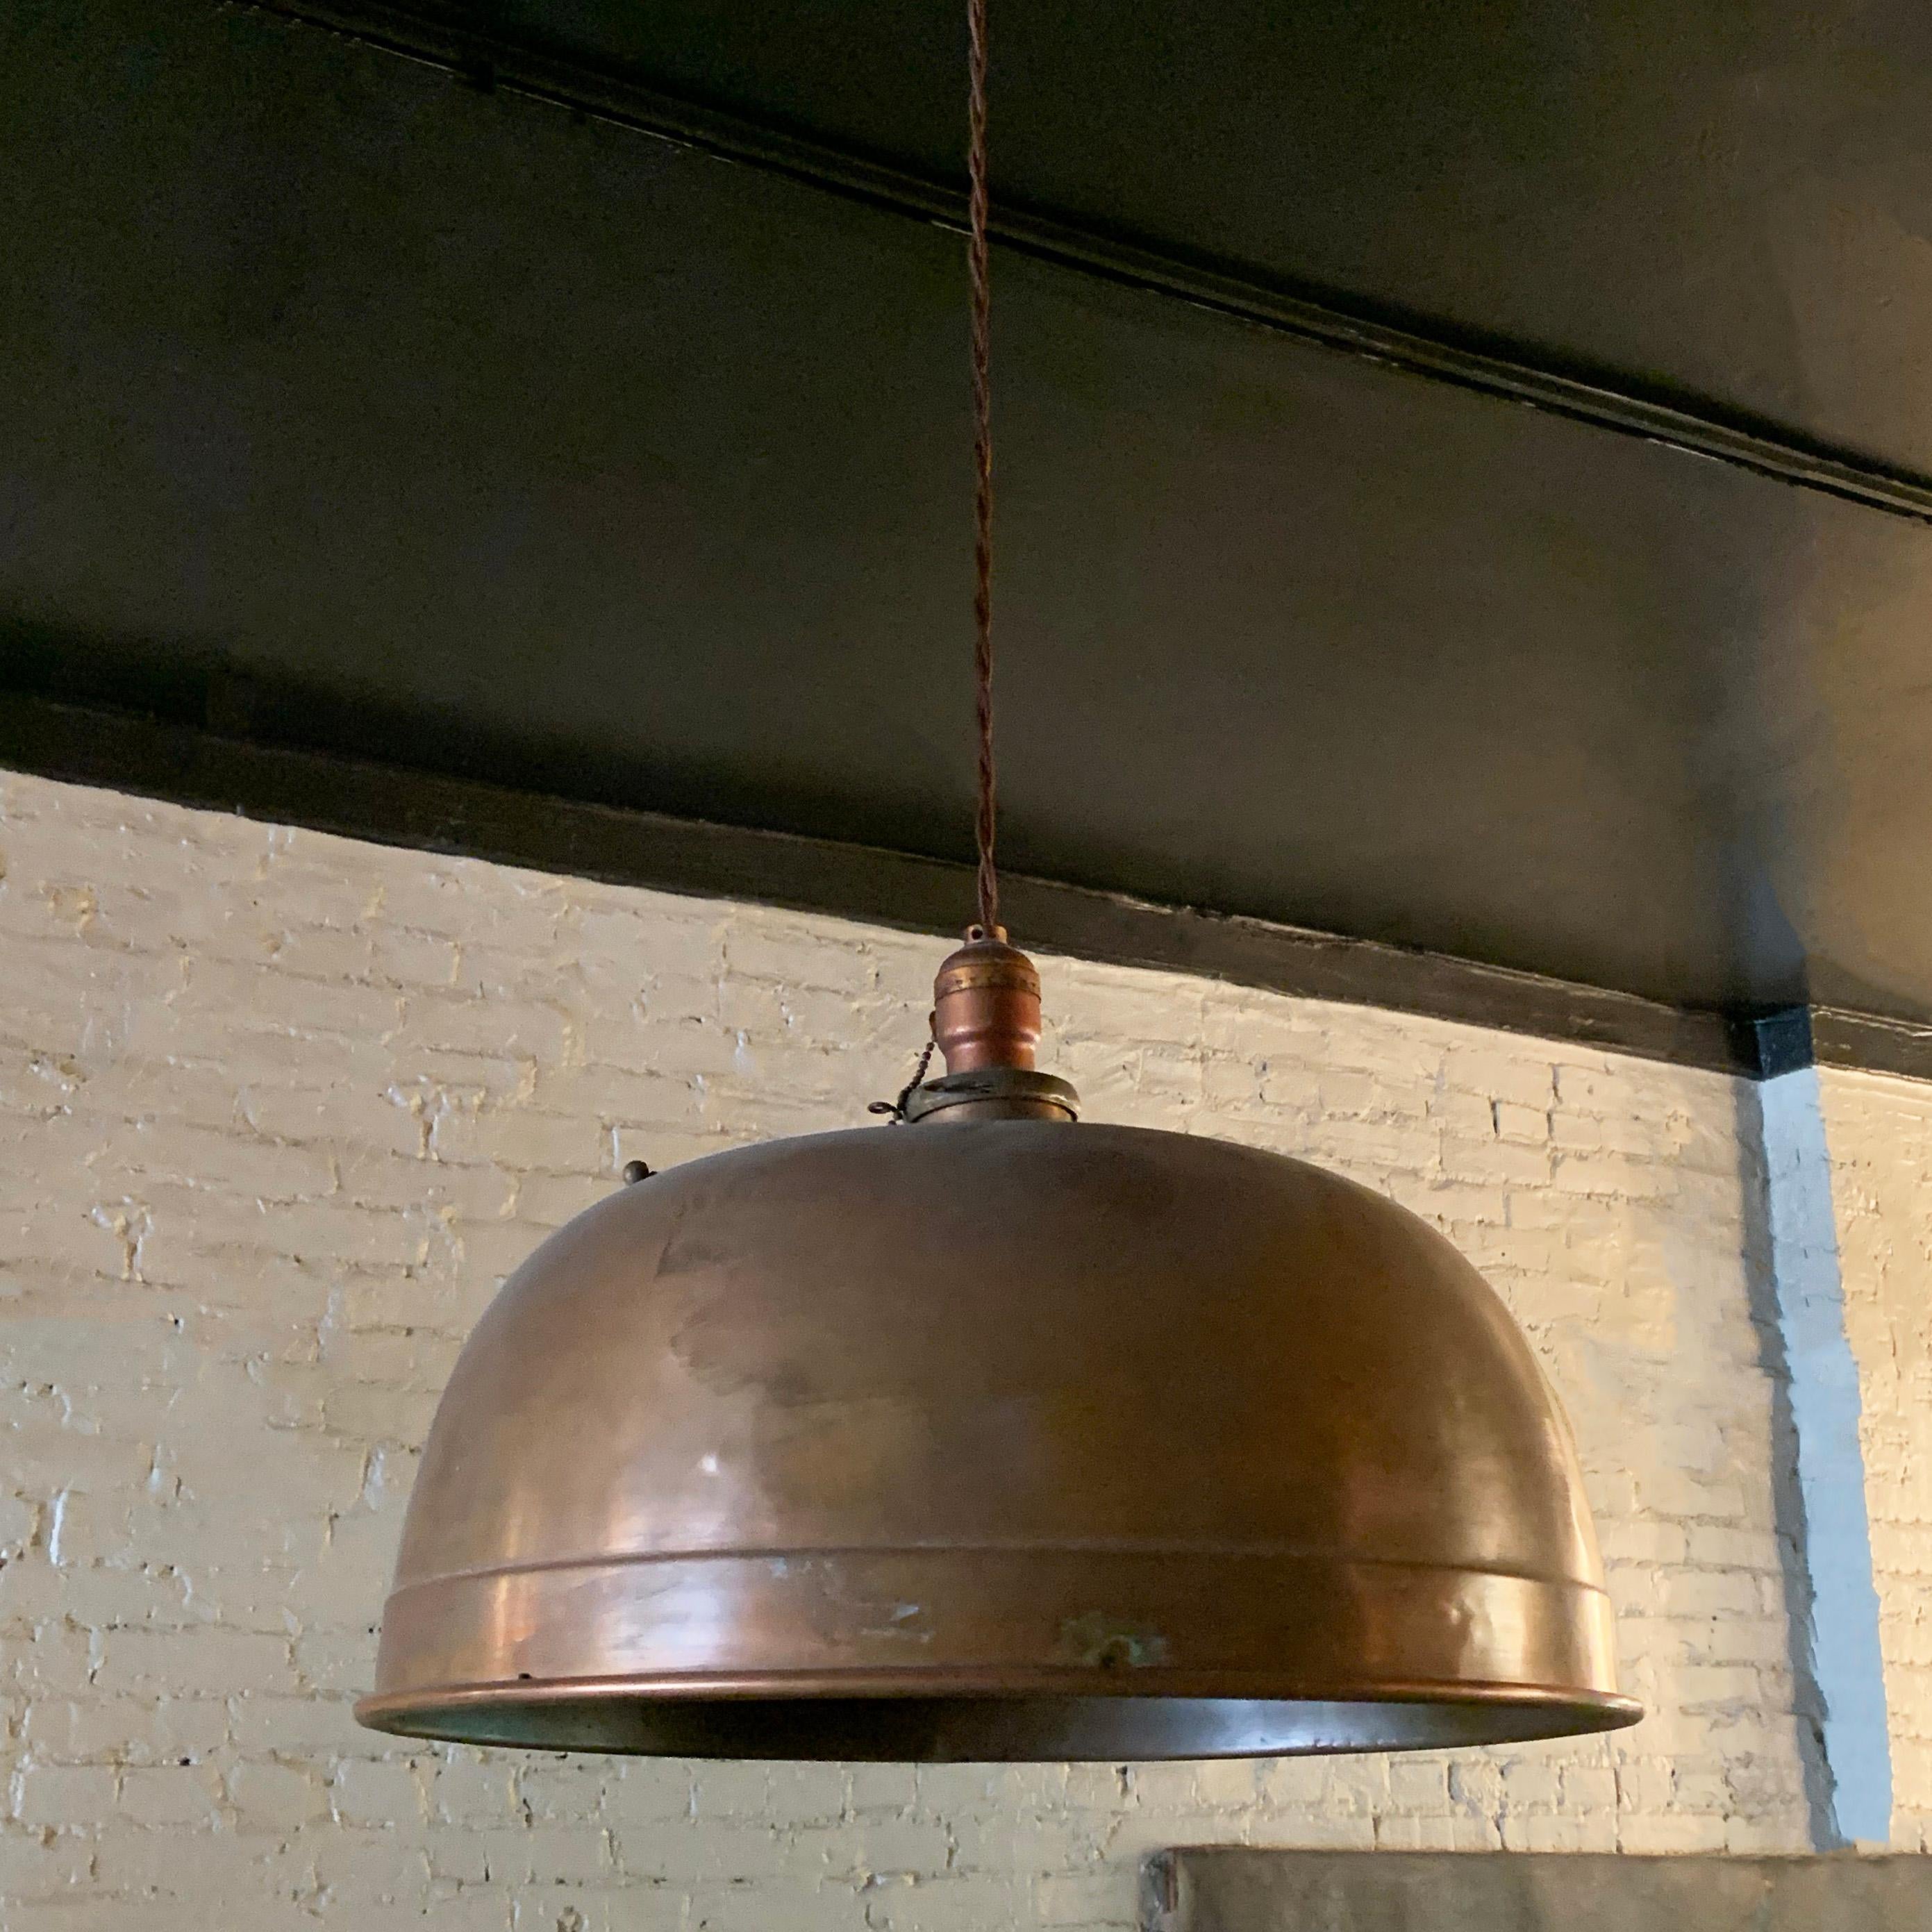 Billiard pendant light by Brunswick Co. features a copper dome shade with brass fitter, newly wired with 40 inches of braided cloth cord to accept up to a 200 watt bulb.